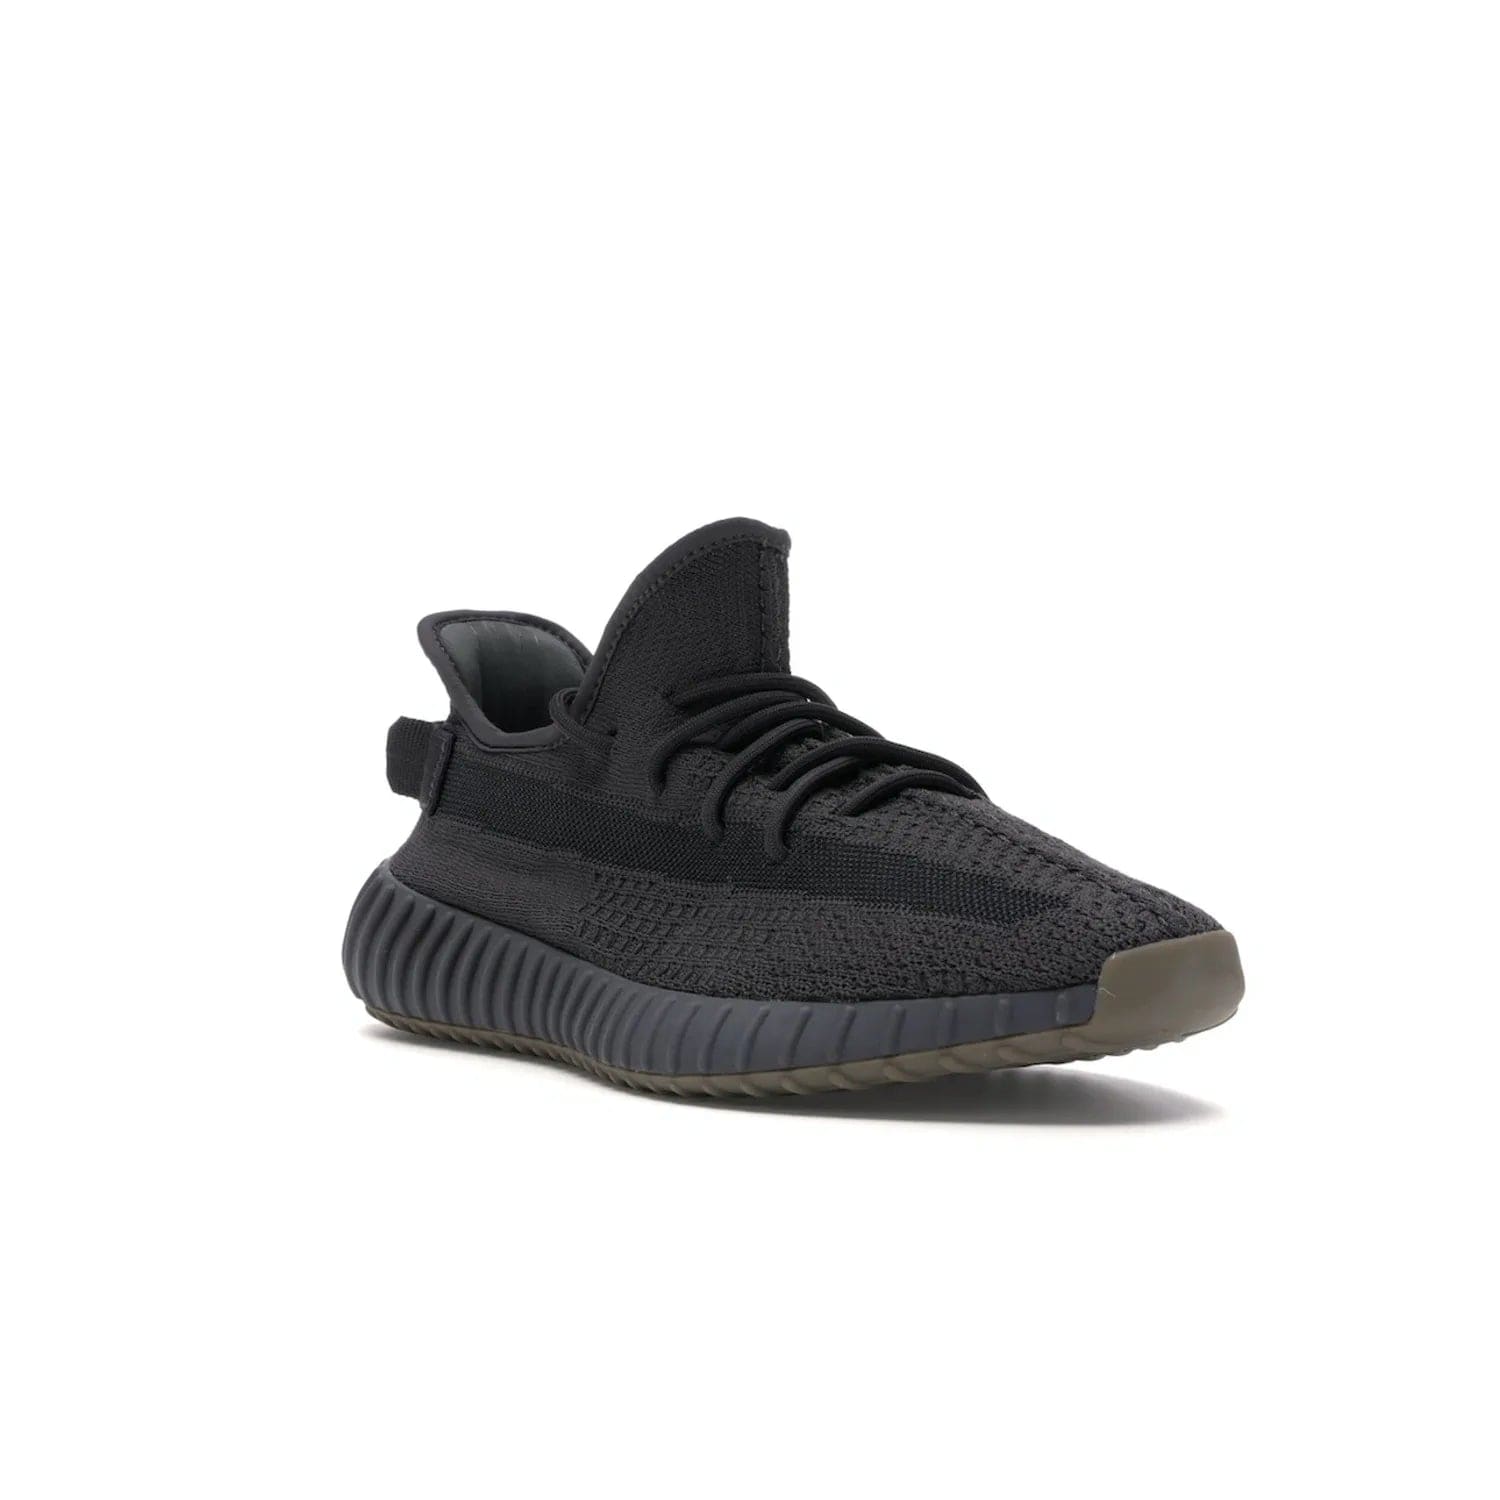 adidas Yeezy Boost 350 V2 Cinder - Image 6 - Only at www.BallersClubKickz.com - Shop for the stylish and eye catching adidas Yeezy 350 V2 Cinder in earth tones. Boost cushioned midsole and gold outsole add a touch of boldness. A timeless addition to any wardrobe.